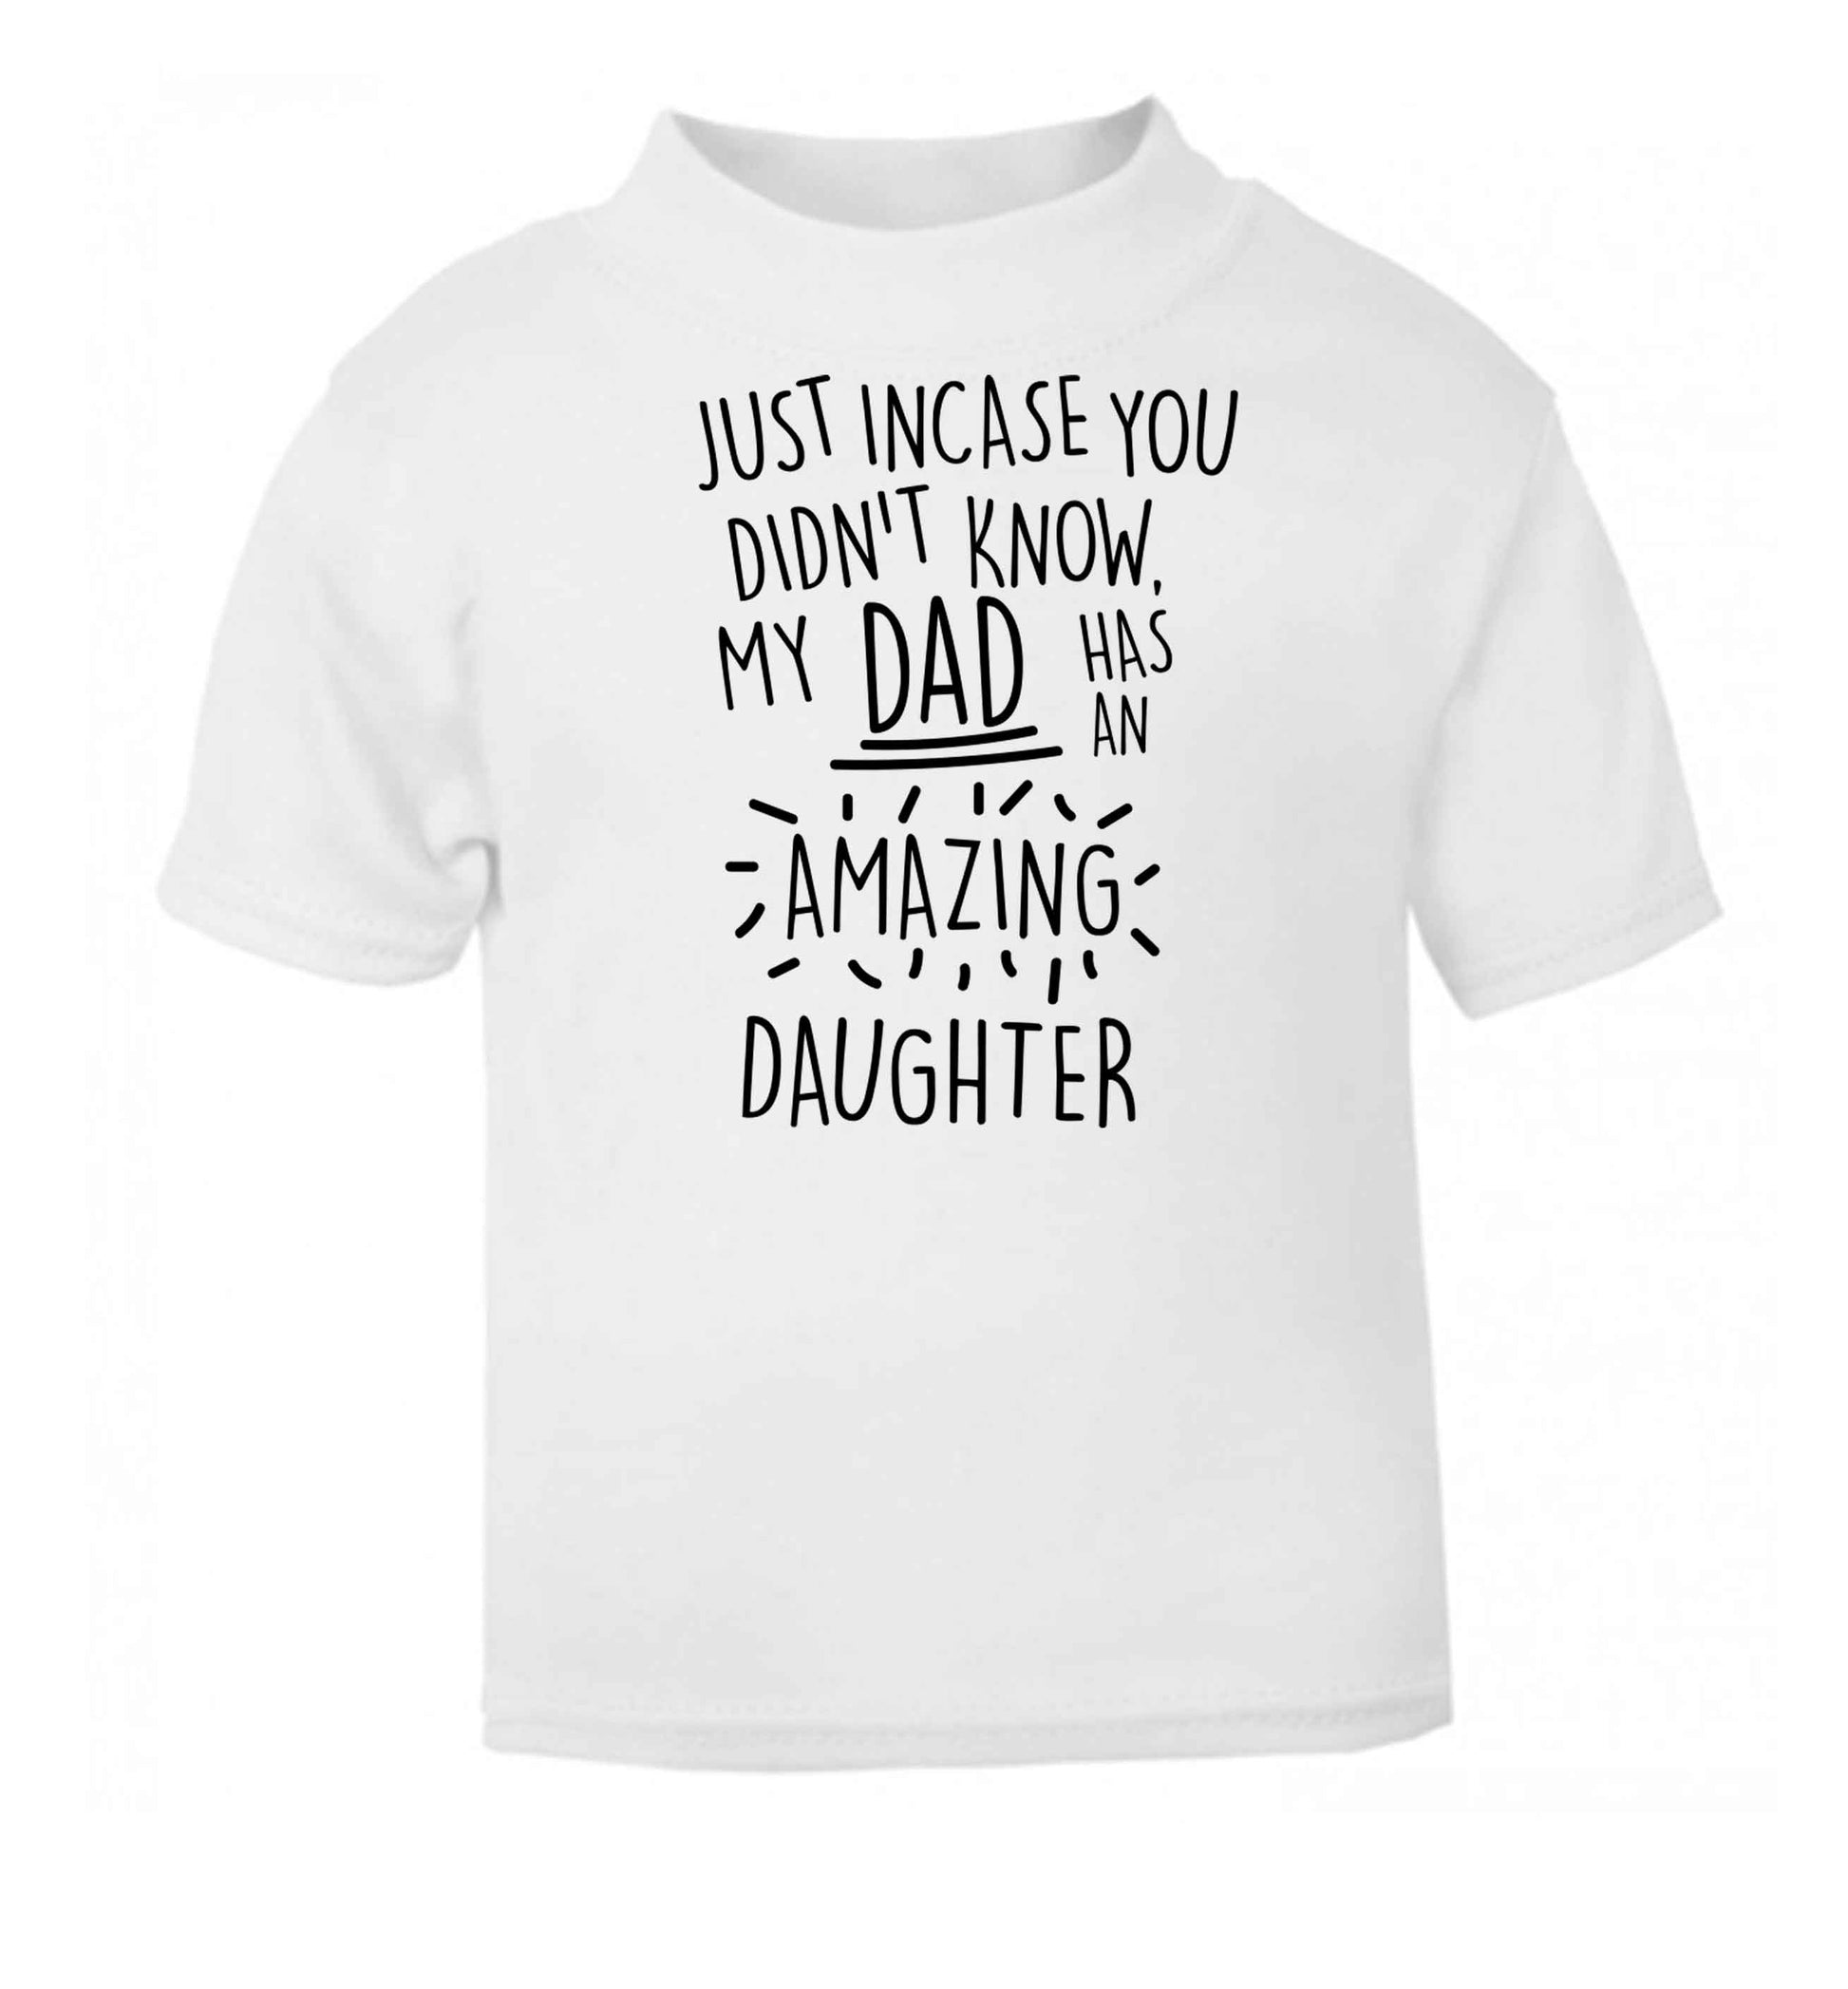 Just incase you didn't know my dad has an amazing daughter white baby toddler Tshirt 2 Years